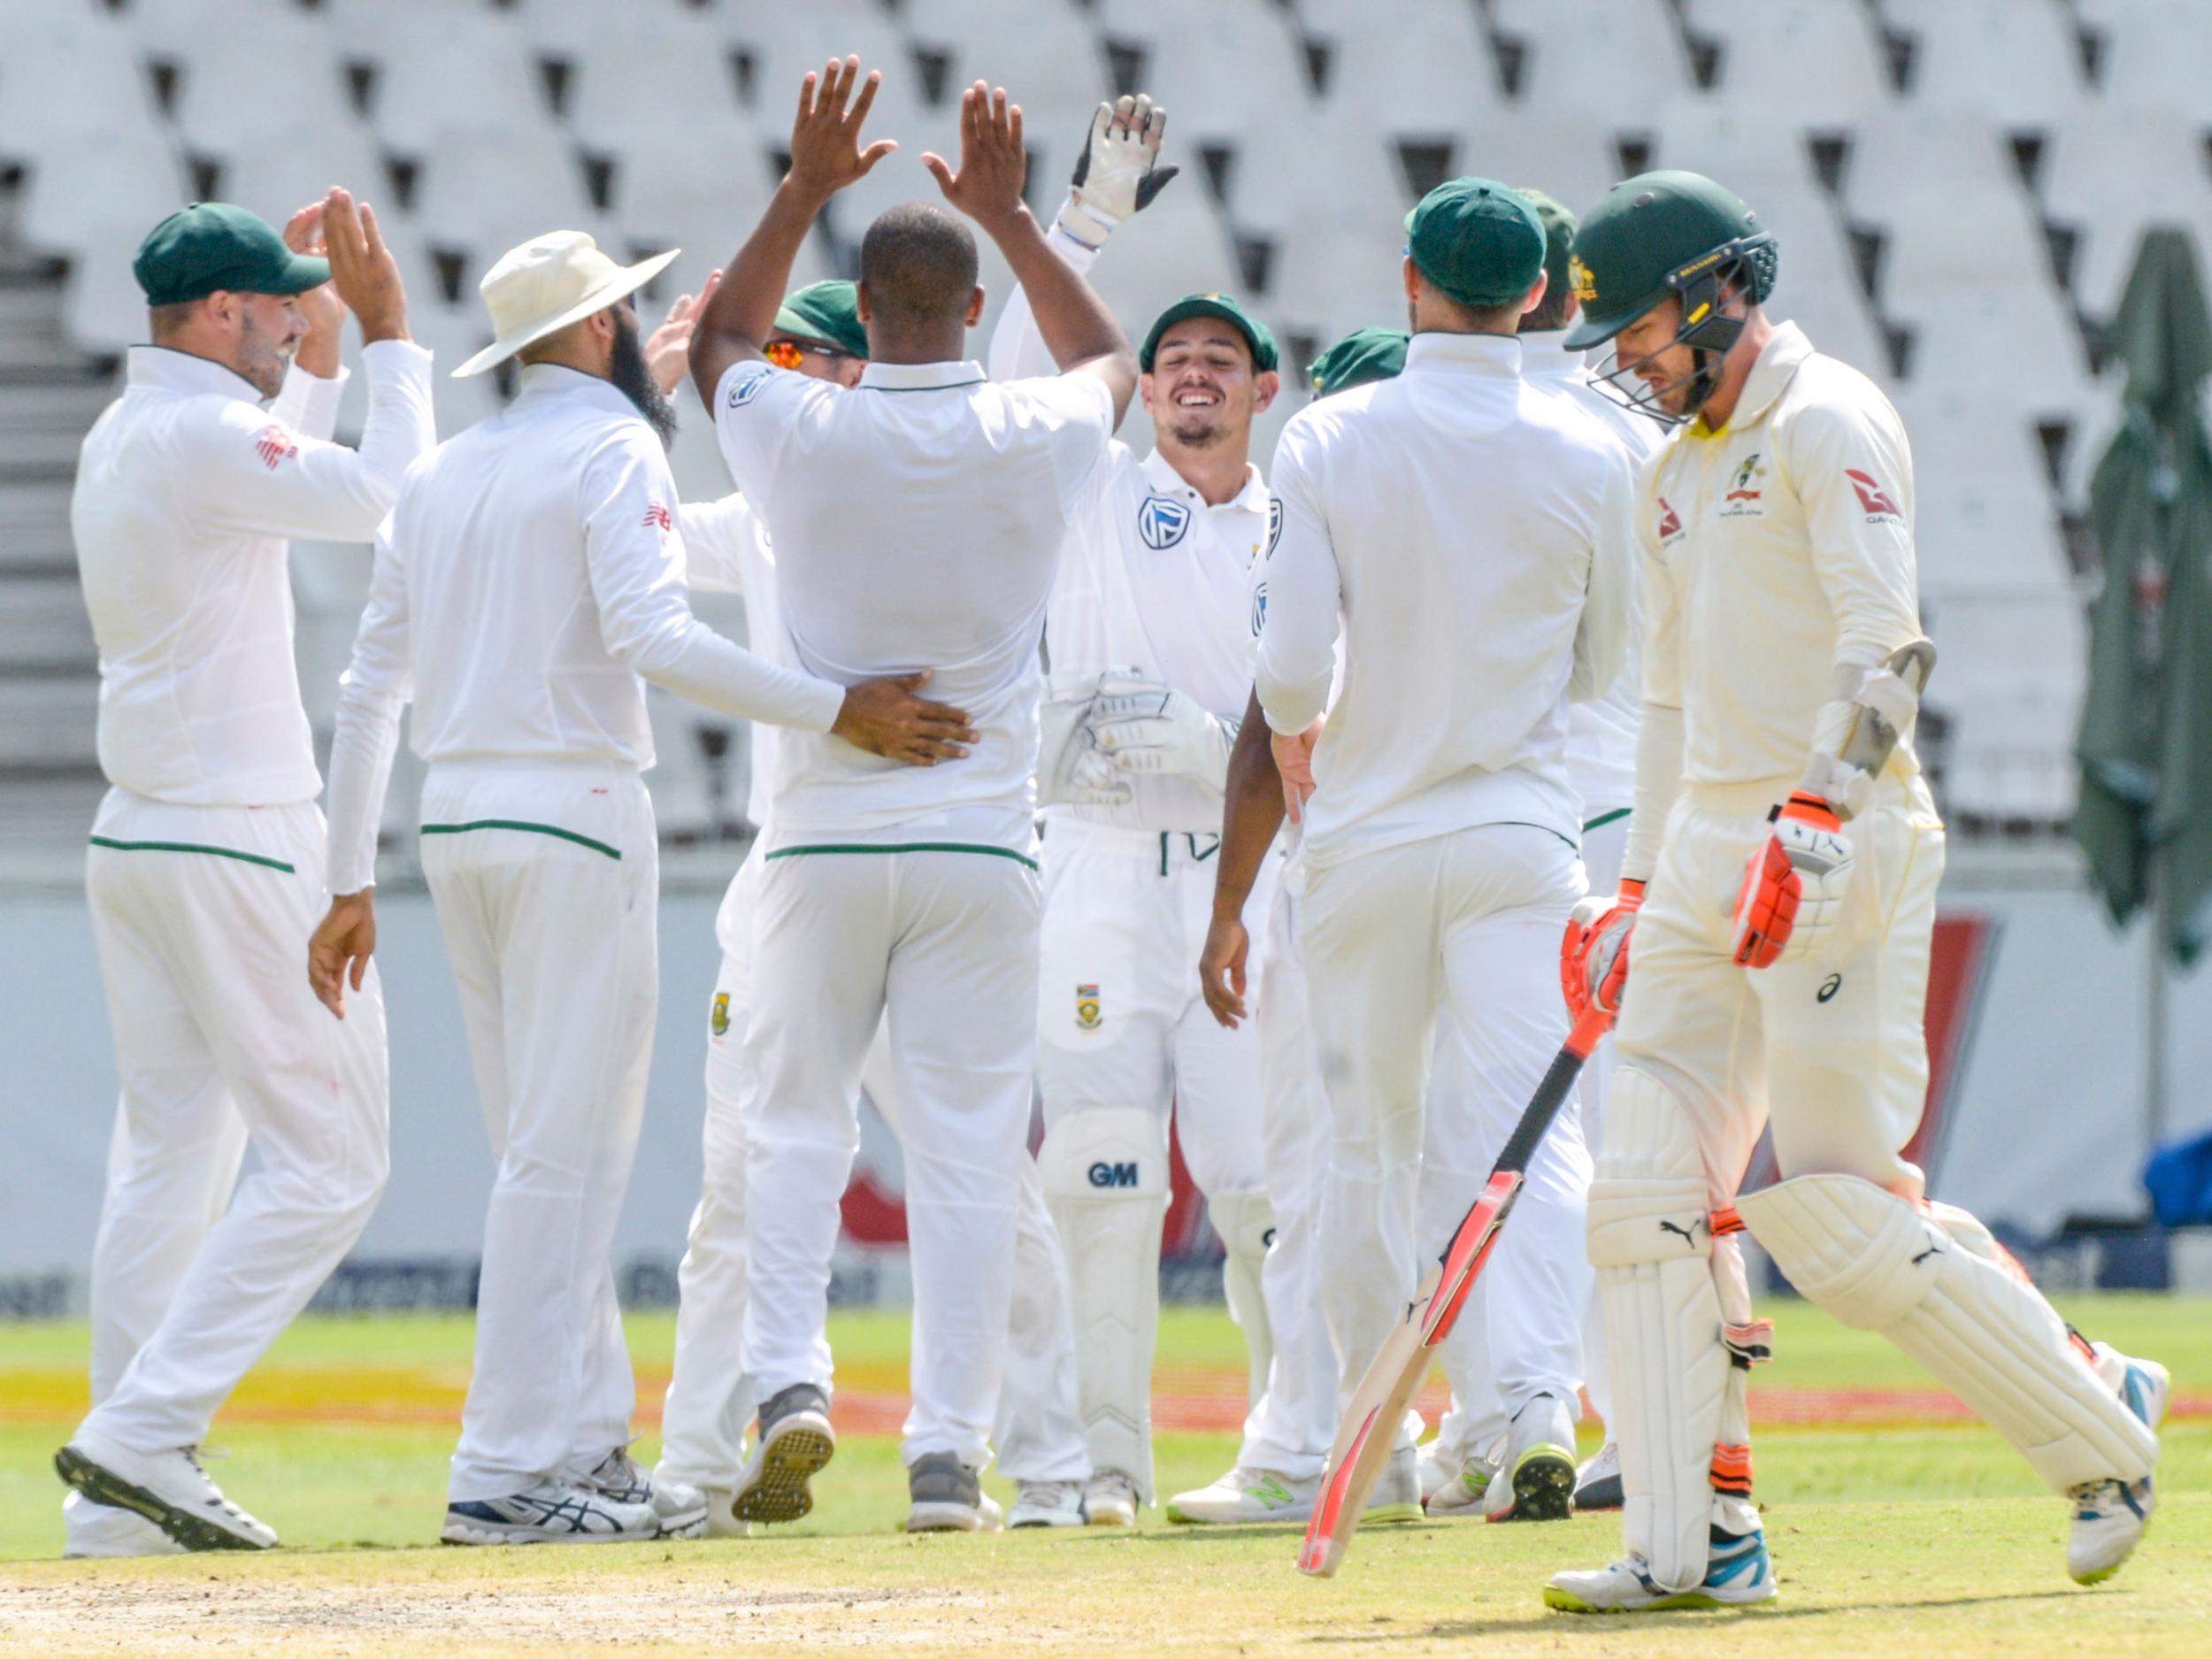 South Africa romped to a 492-run victory in Johannesburg